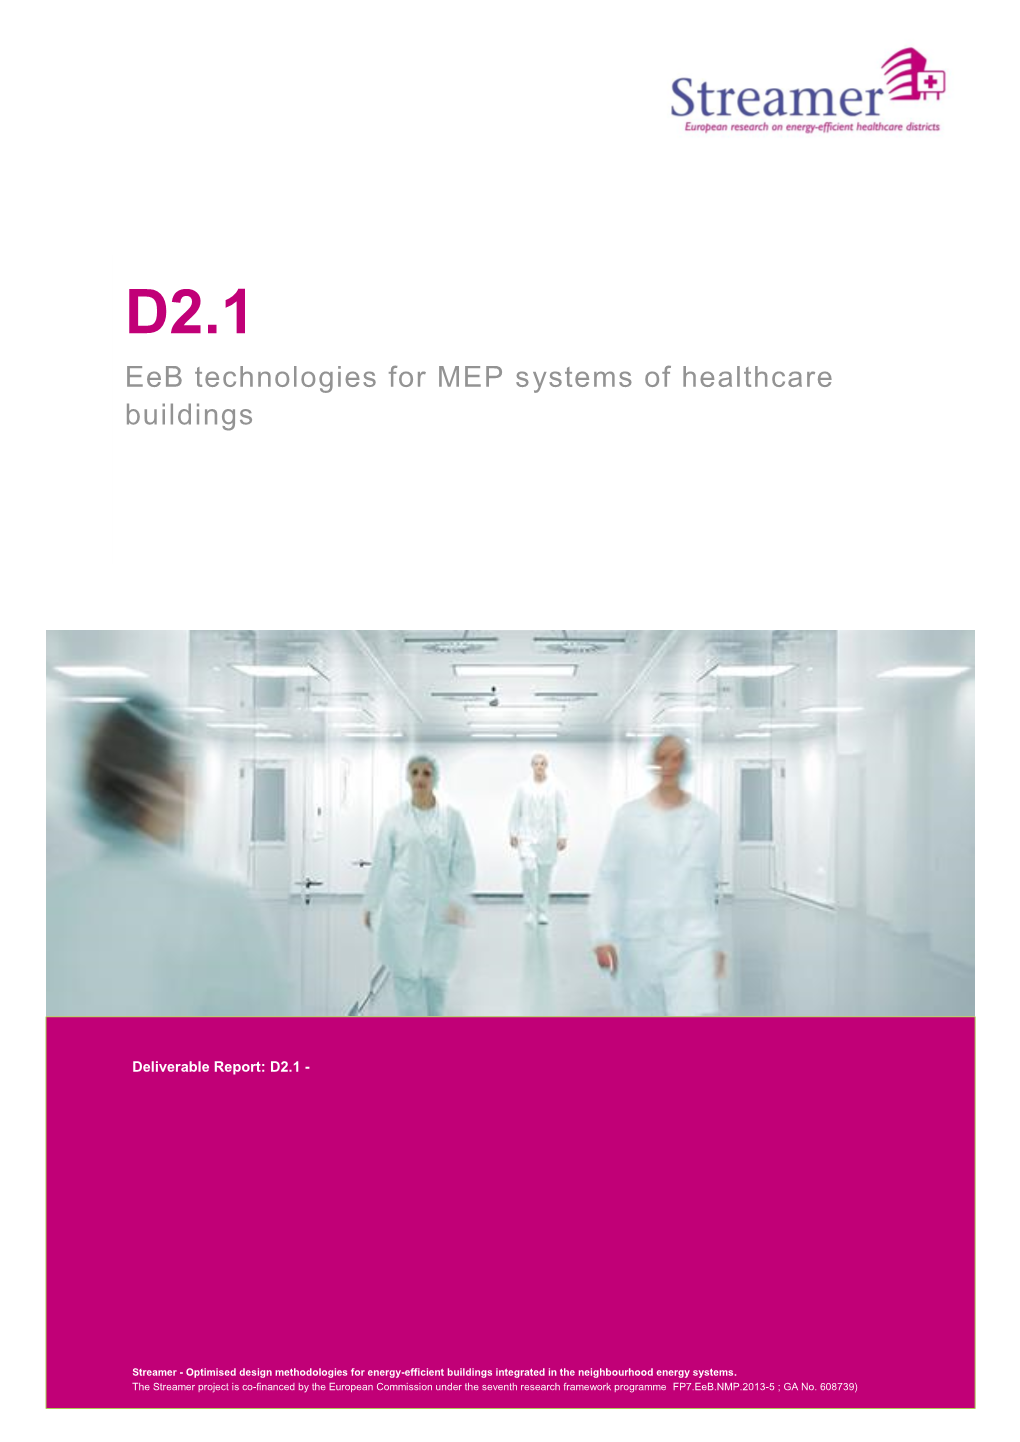 D2.1 Eeb Technologies for MEP Systems of Healthcare Buildings